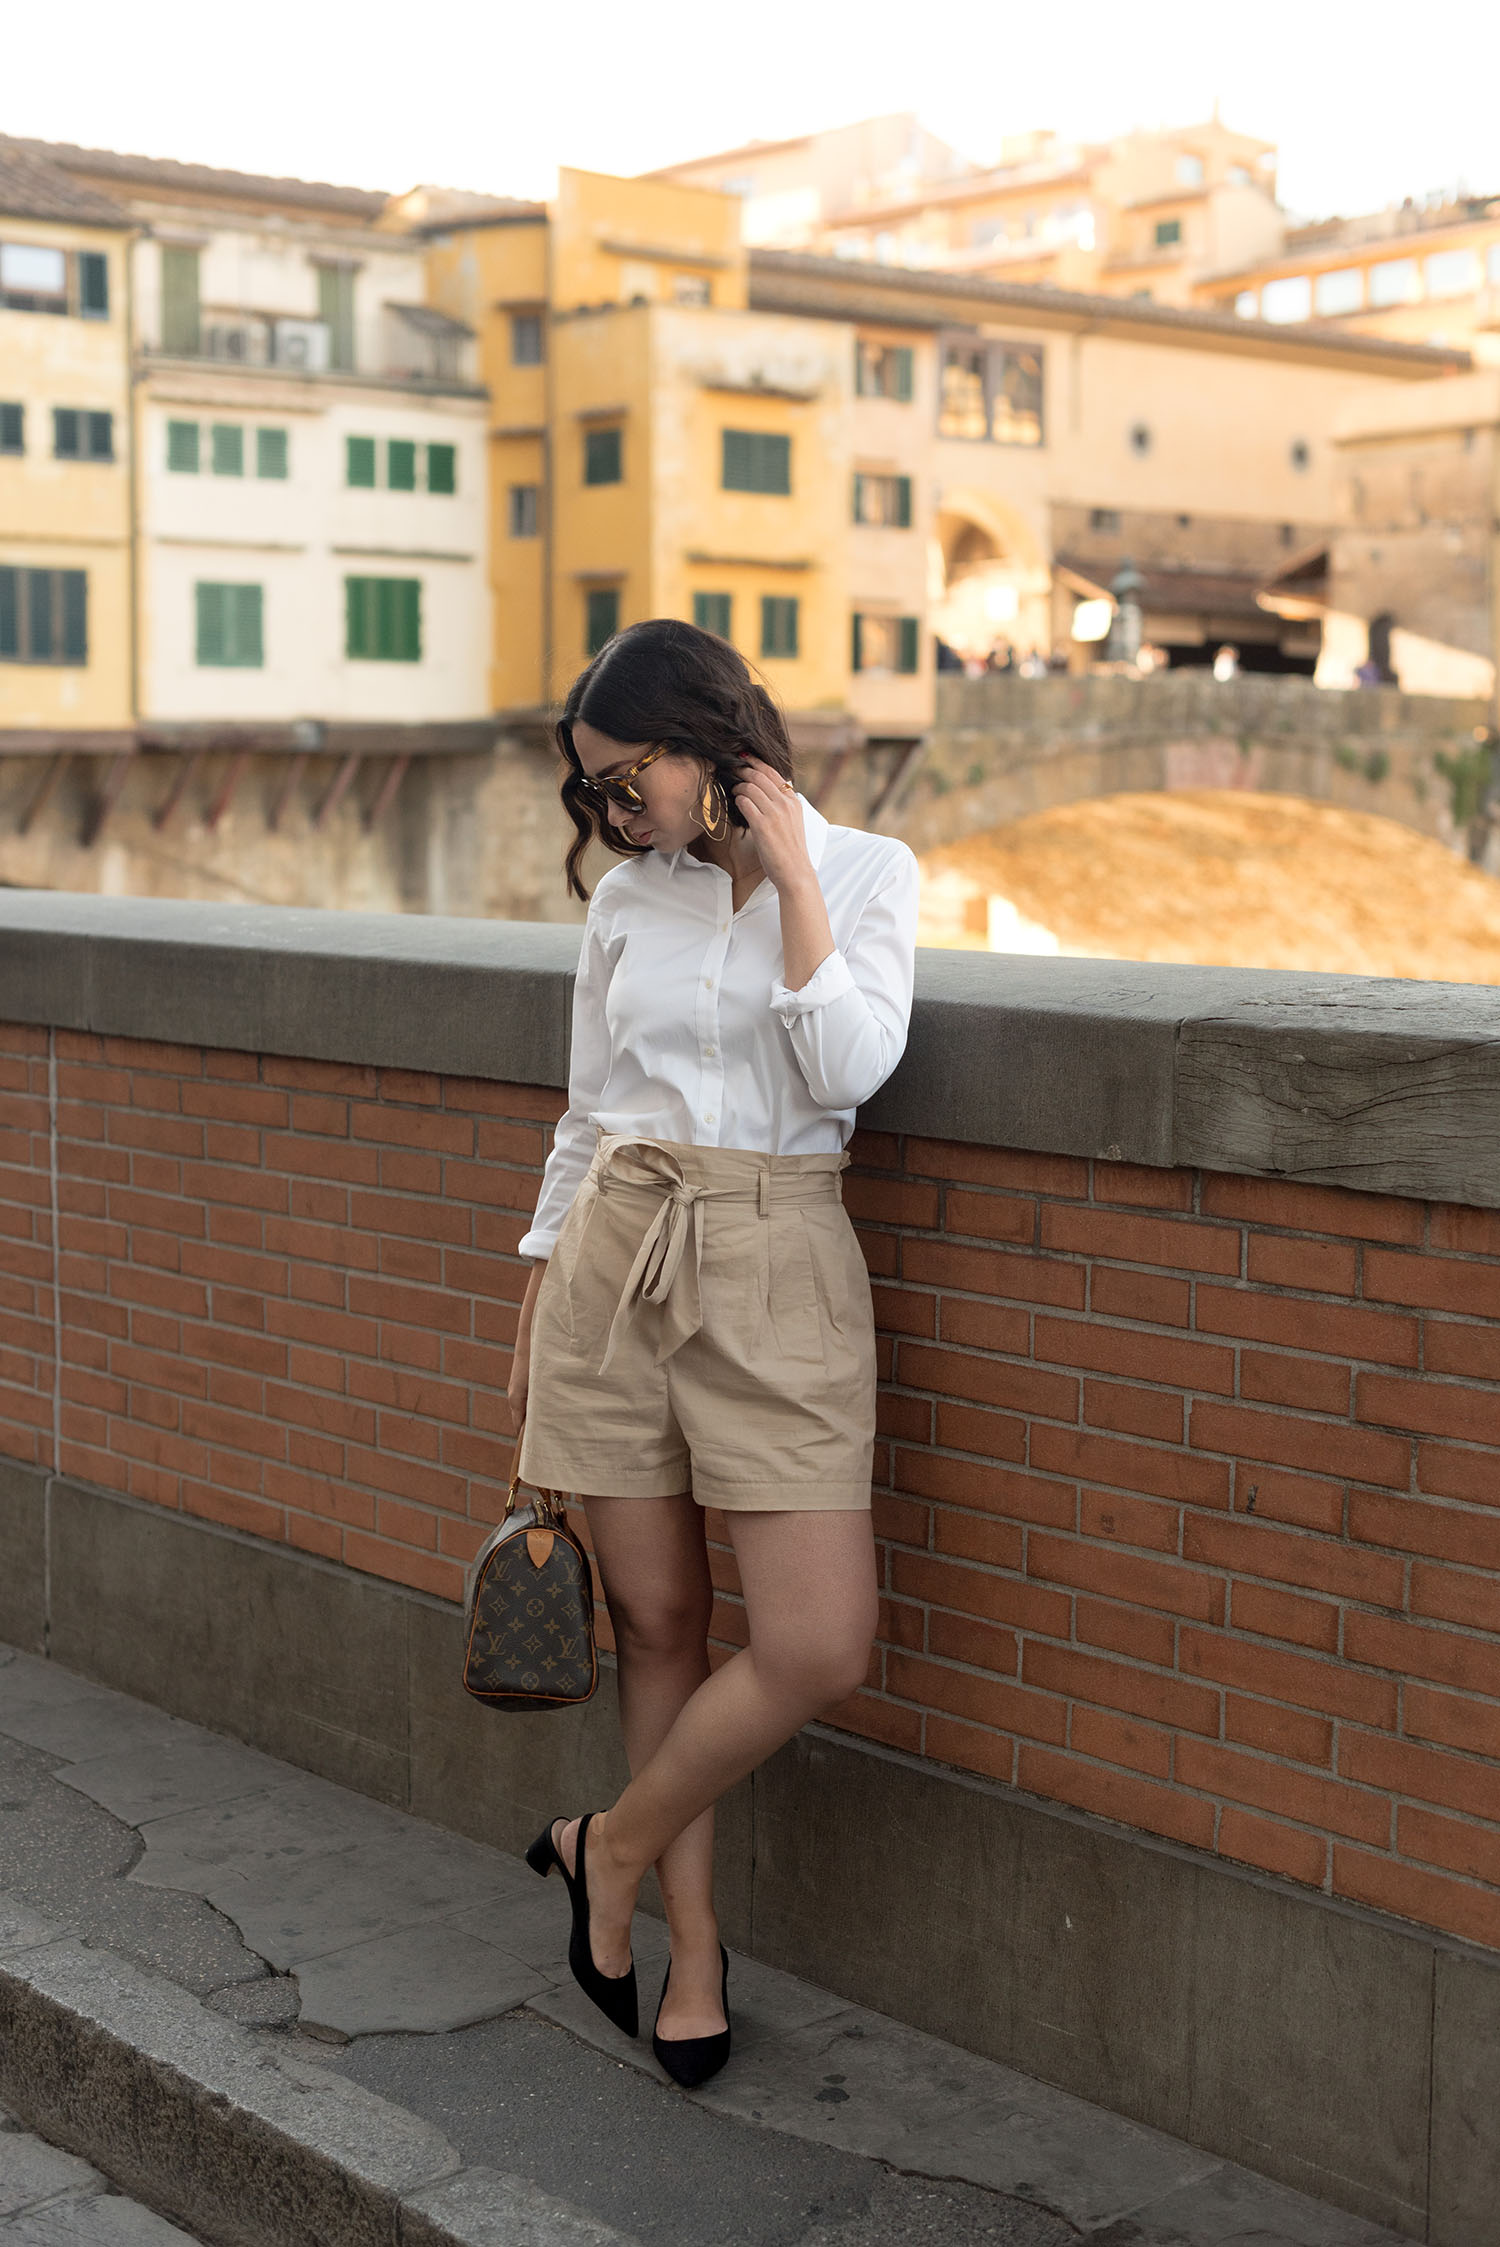 Top Winnipeg fashion blogger Cee Fardoe of Coco & Vera in Florence, Italy, wearing Zara paperboy waist shorts and a Uniqlo white oxford shirt